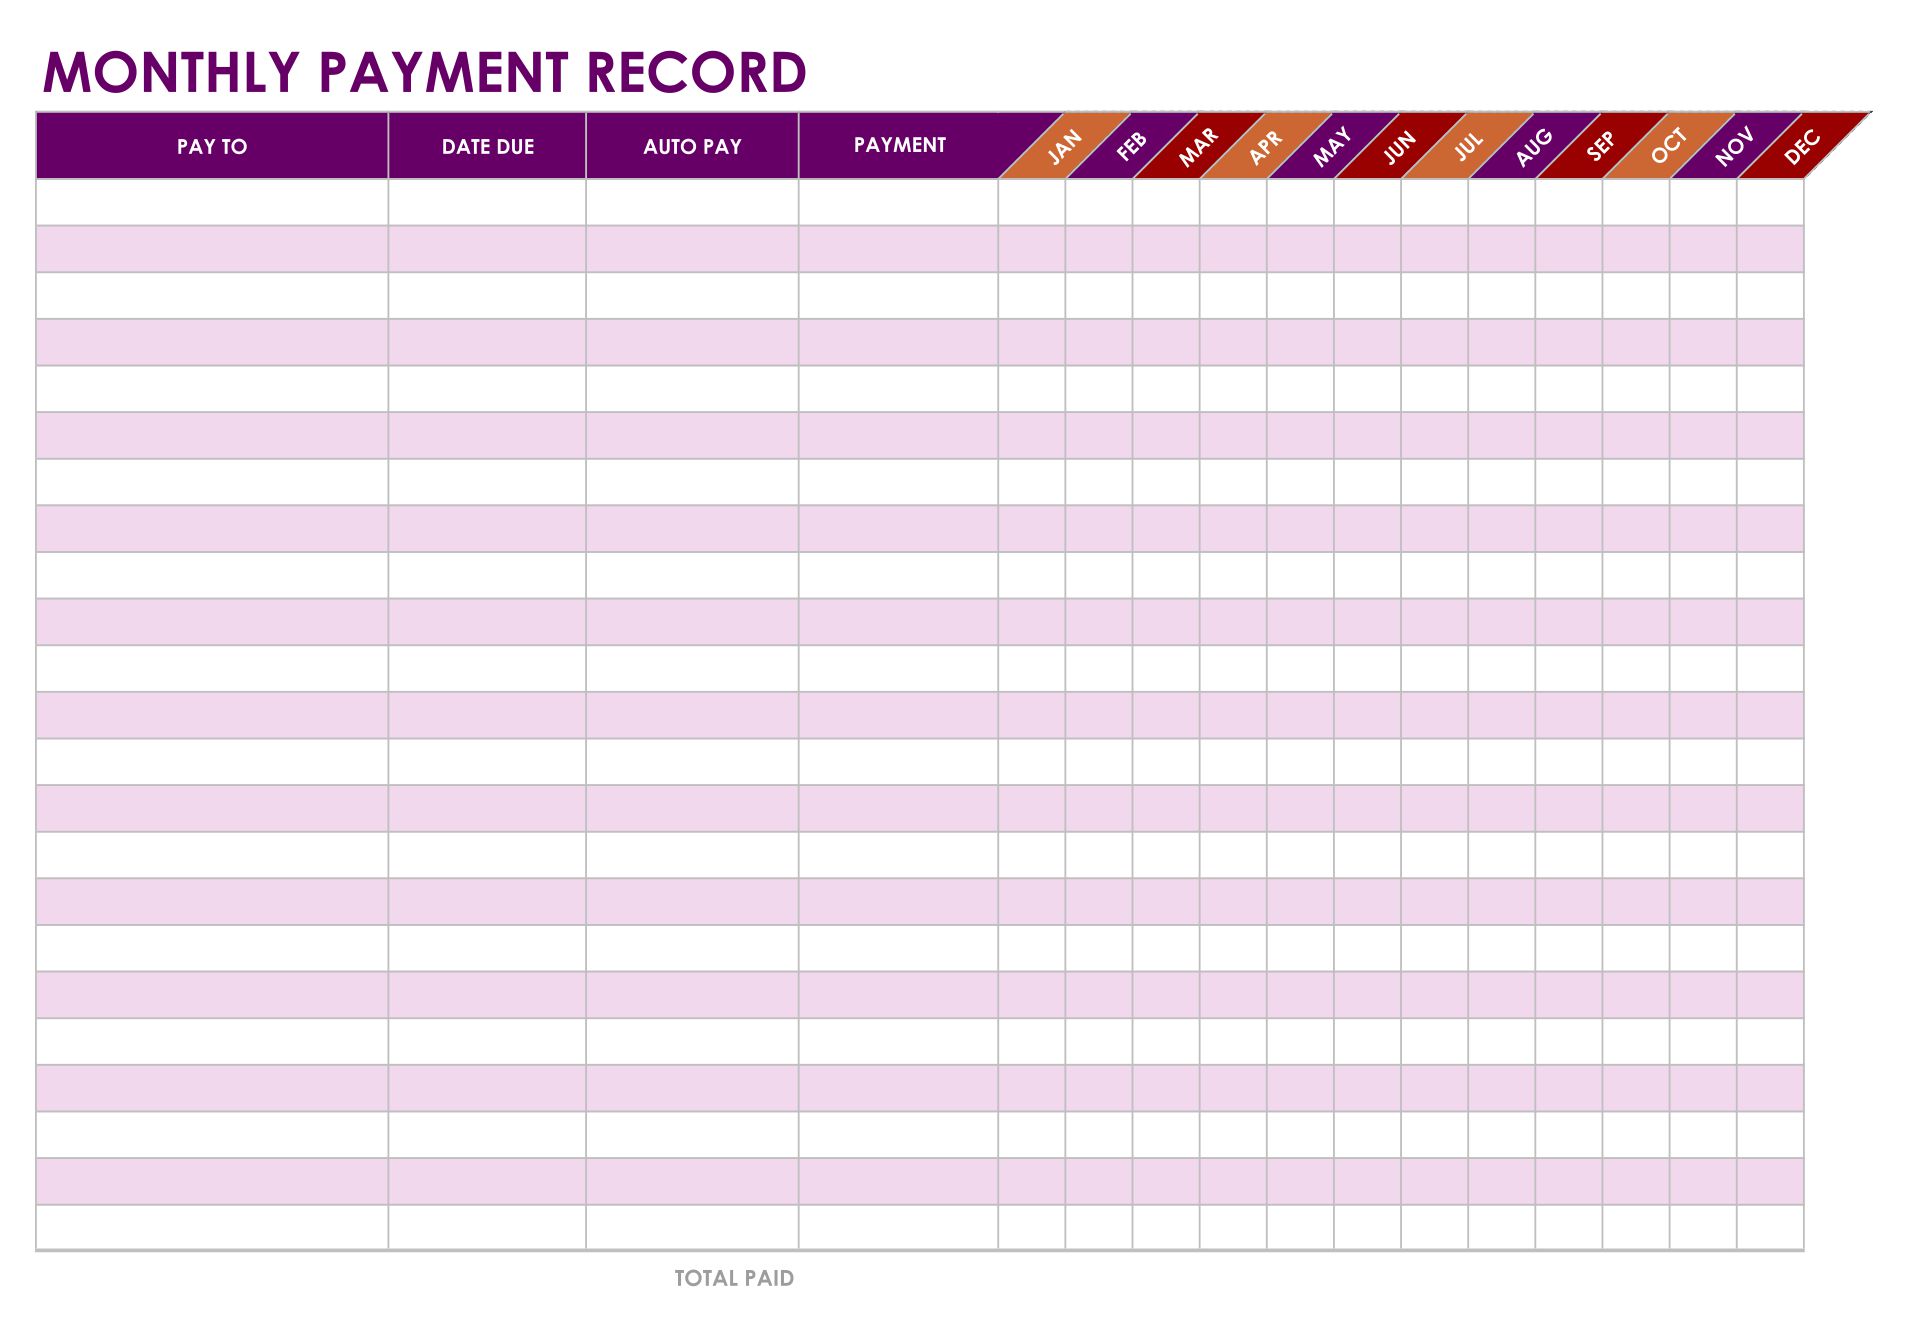 Monthly Payment Record Template